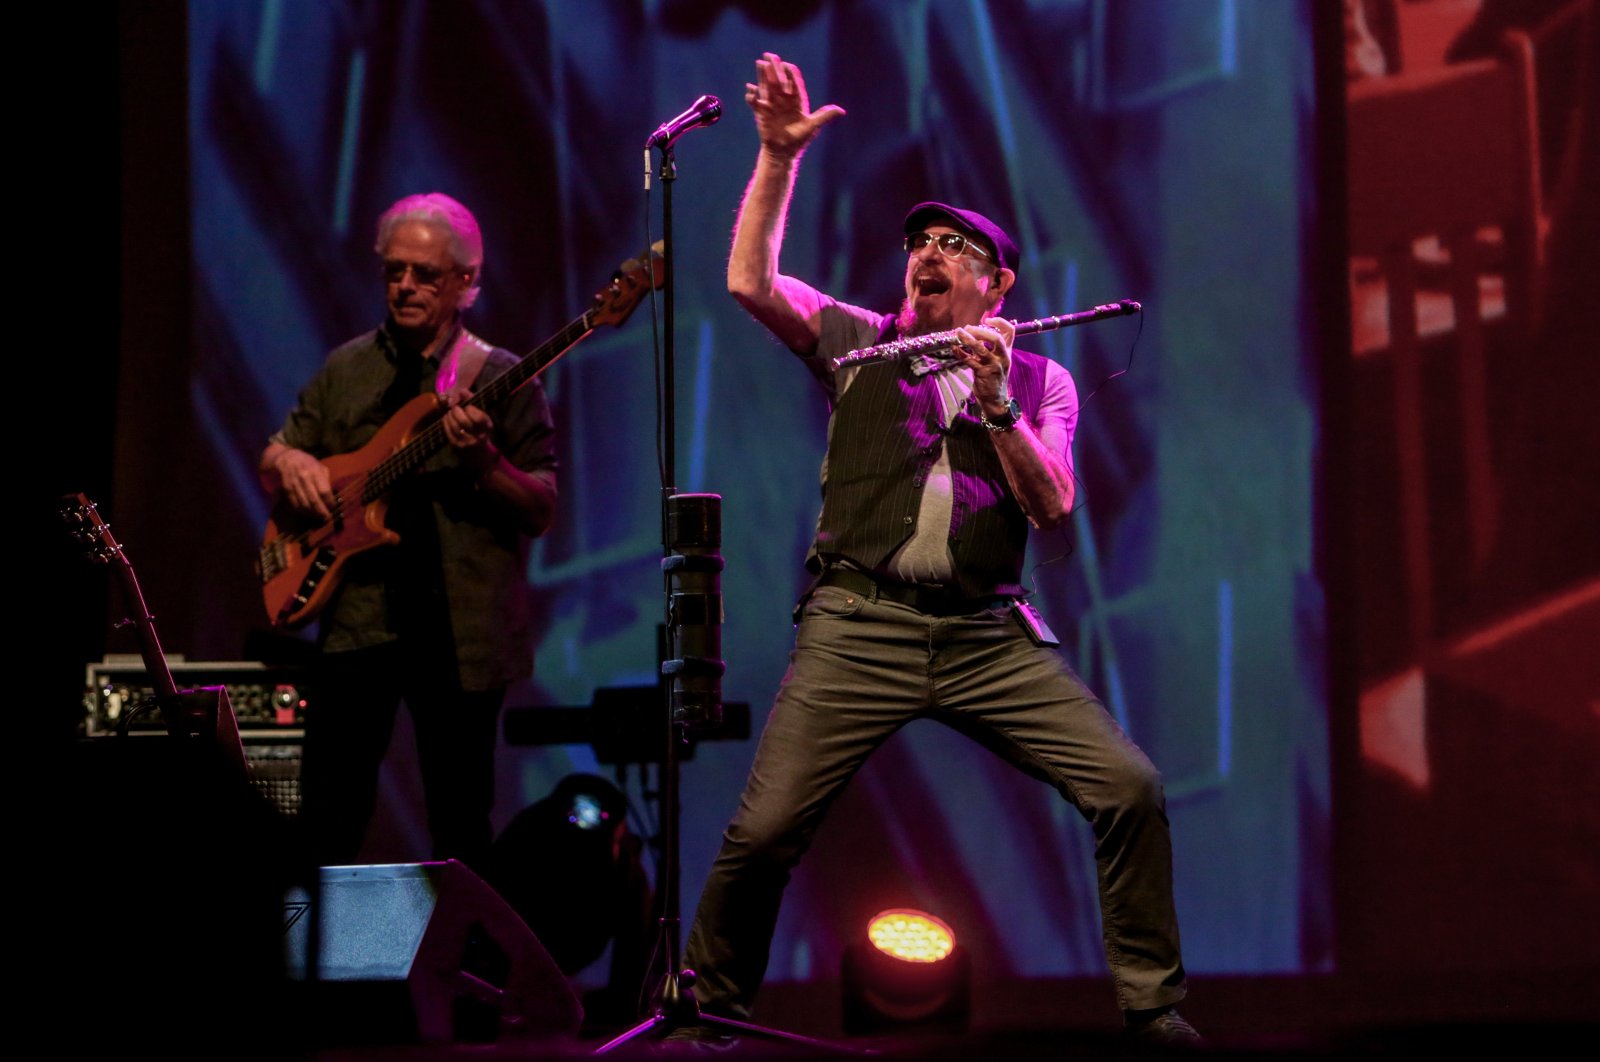 Singer Ian Anderson is seen on stage with his band Jethro Tull at the Prog Years concert in Madrid, Spain, Feb. 29, 2020. (Getty Images Photo)